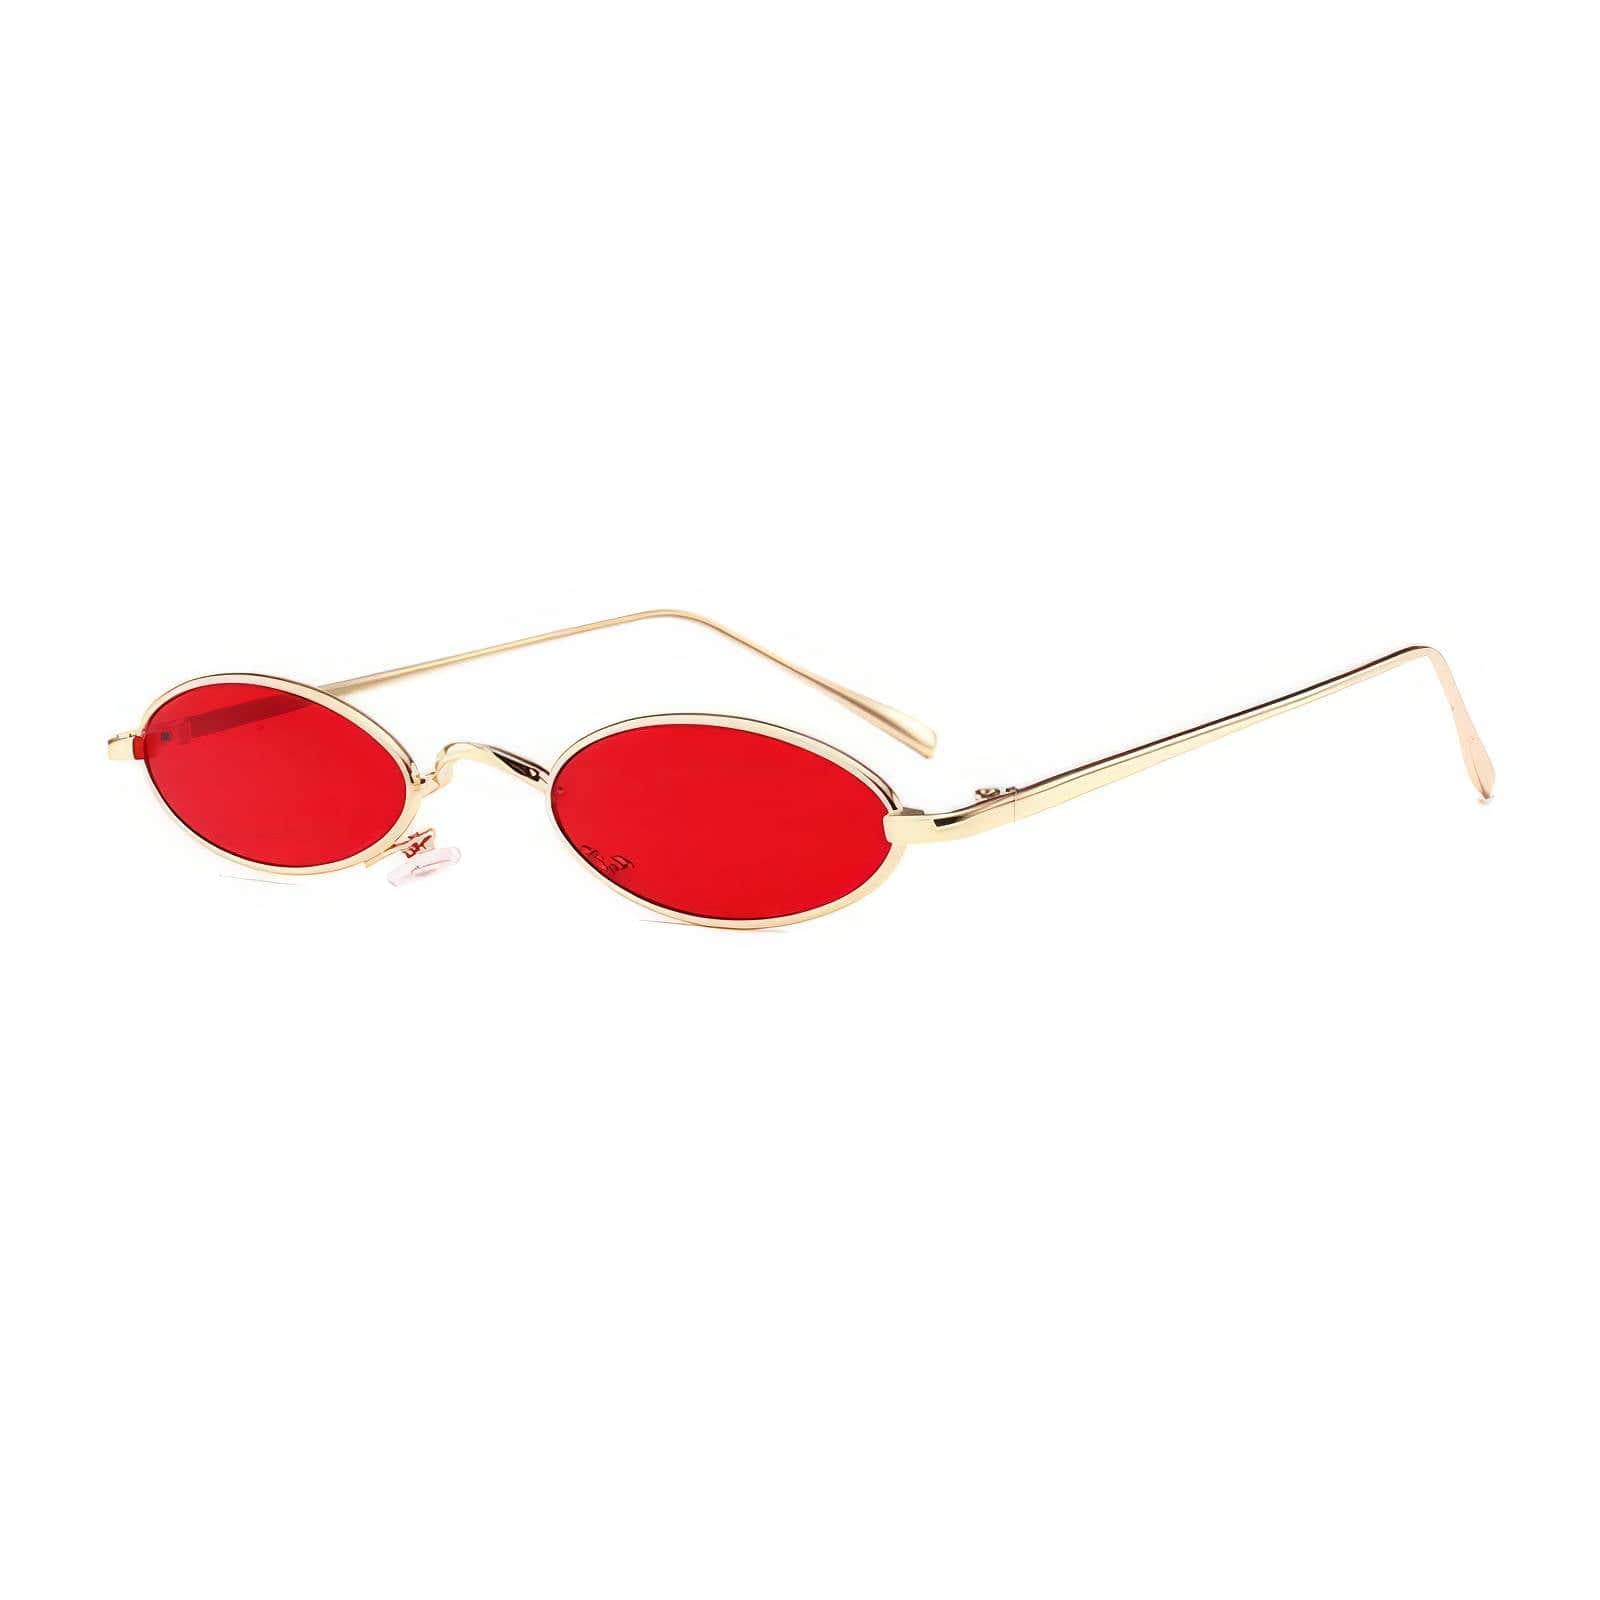 Oval Small Metal Frame Sunglasses Red/Gold / Resin